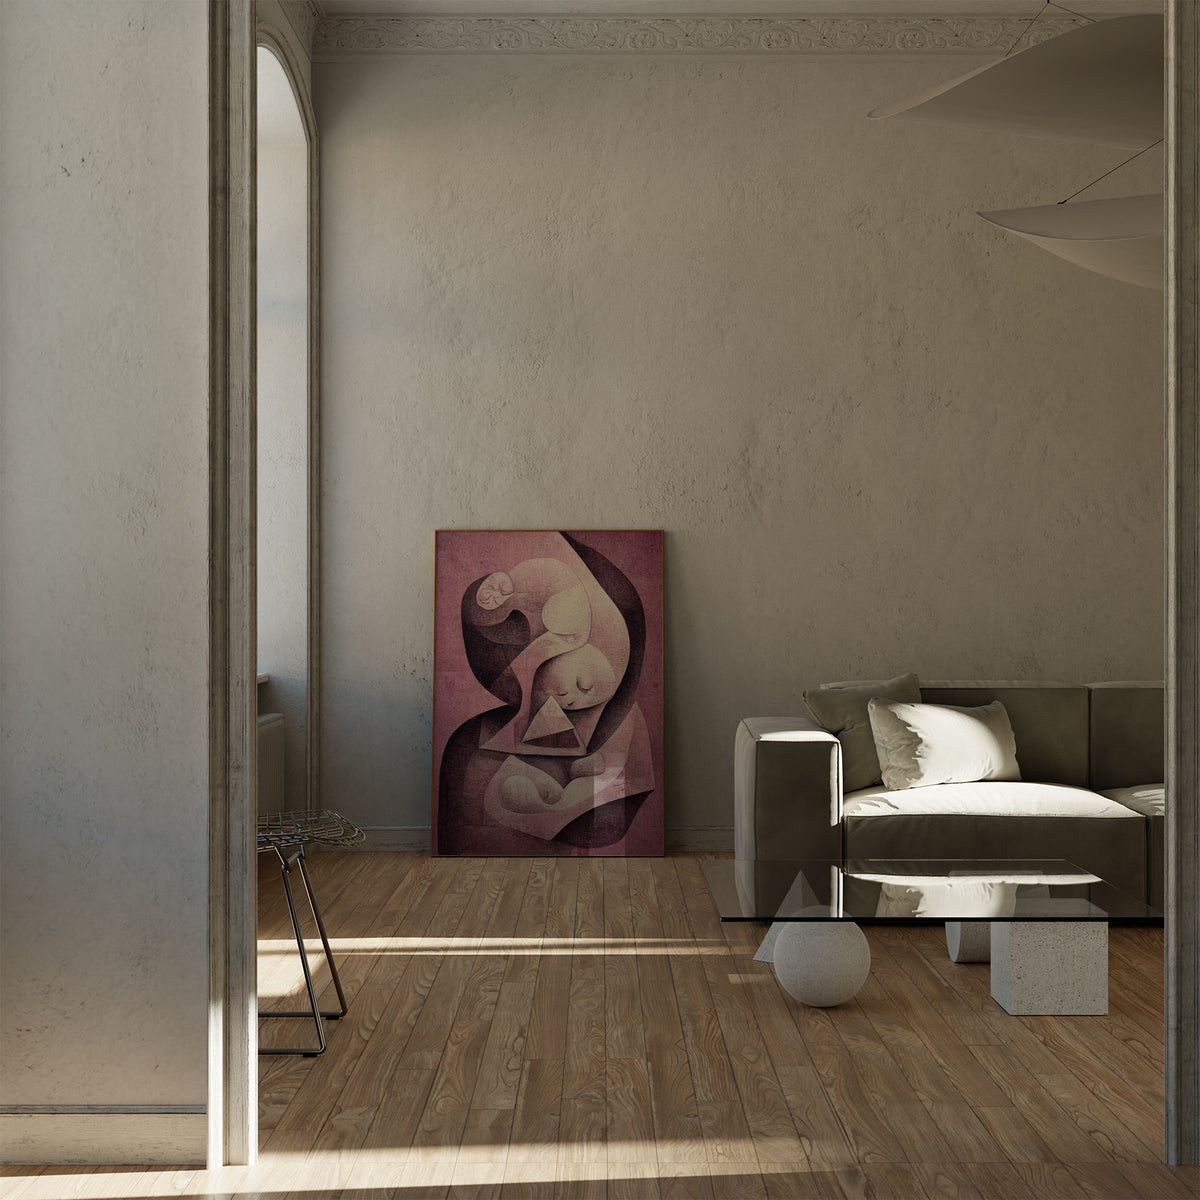 Gynecology Clinic Decor - Unique artwork featuring fetal ultrasound imagery, designed to infuse positivity into your clinic's environment.